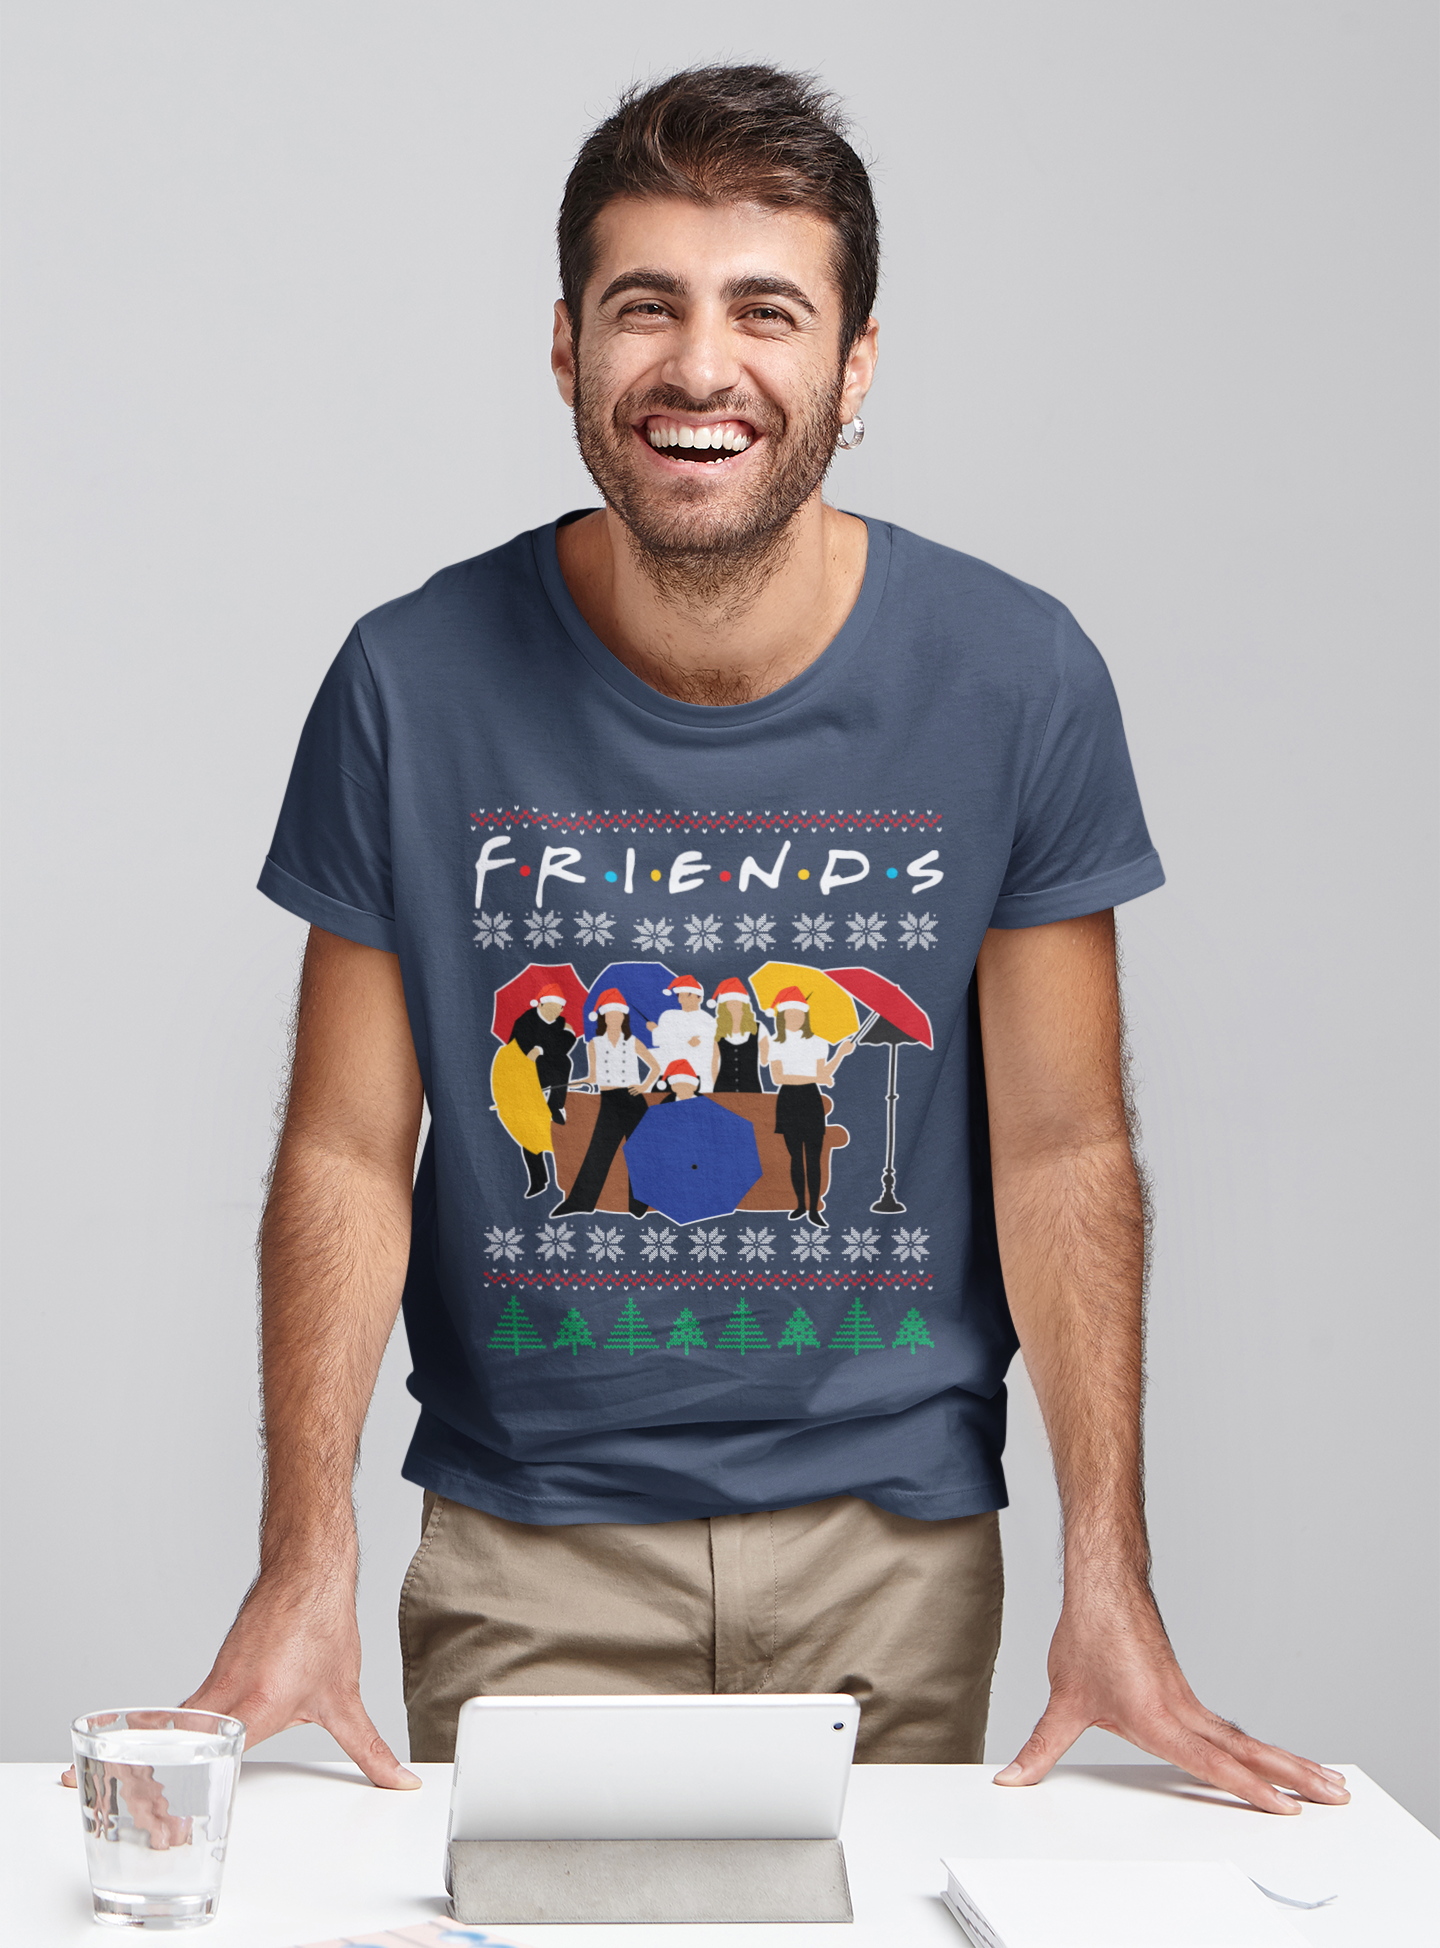 Friends TV Show Ugly Sweater T Shirt, Friends Characters T Shirt, Christmas Gifts